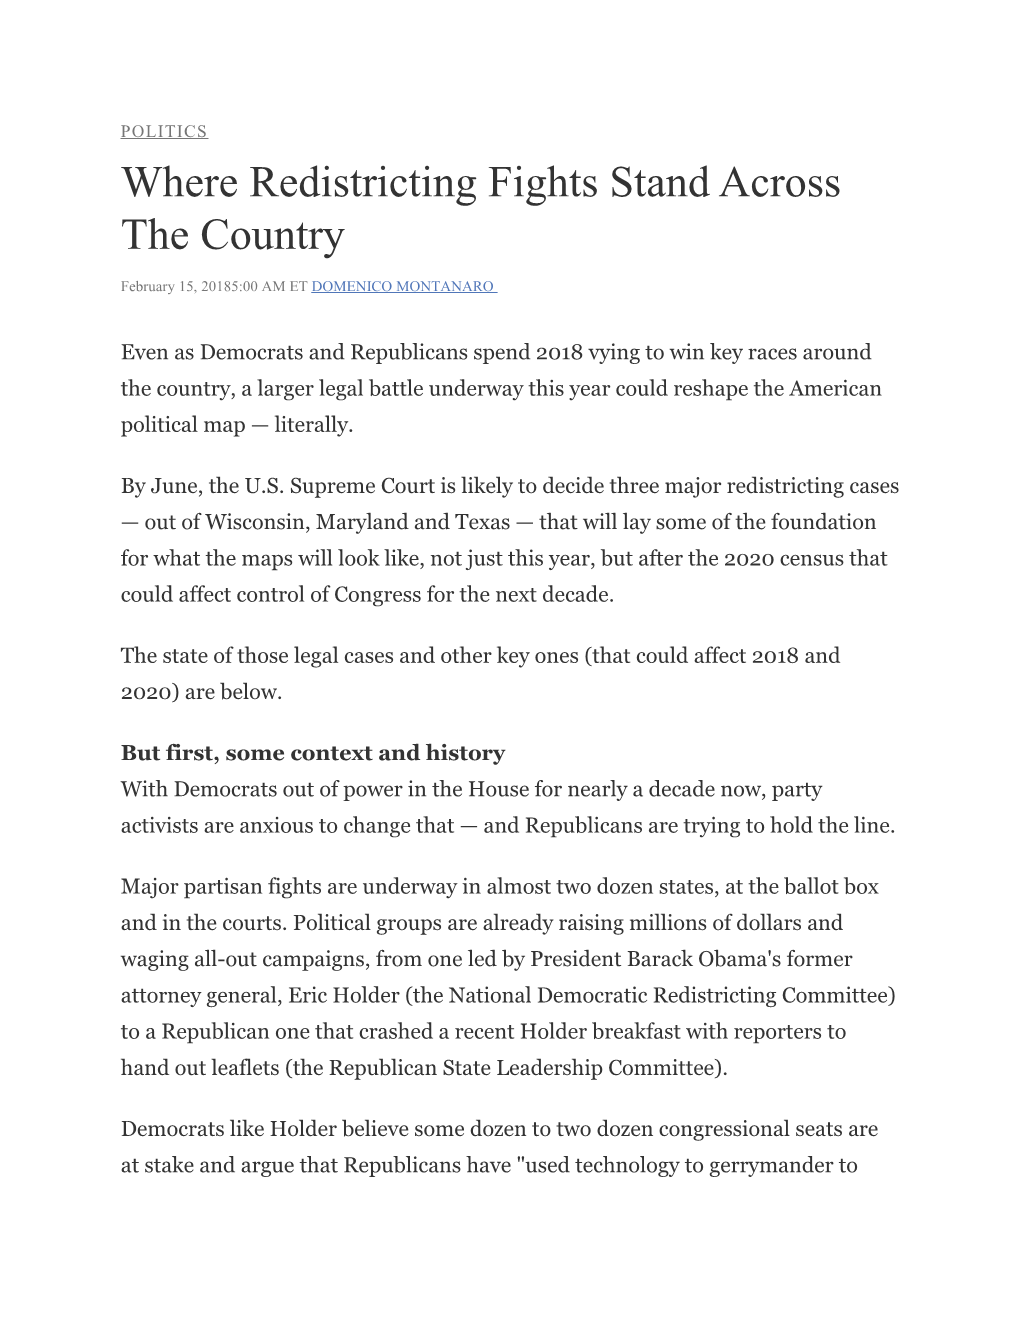 Where Redistricting Fights Stand Across the Country